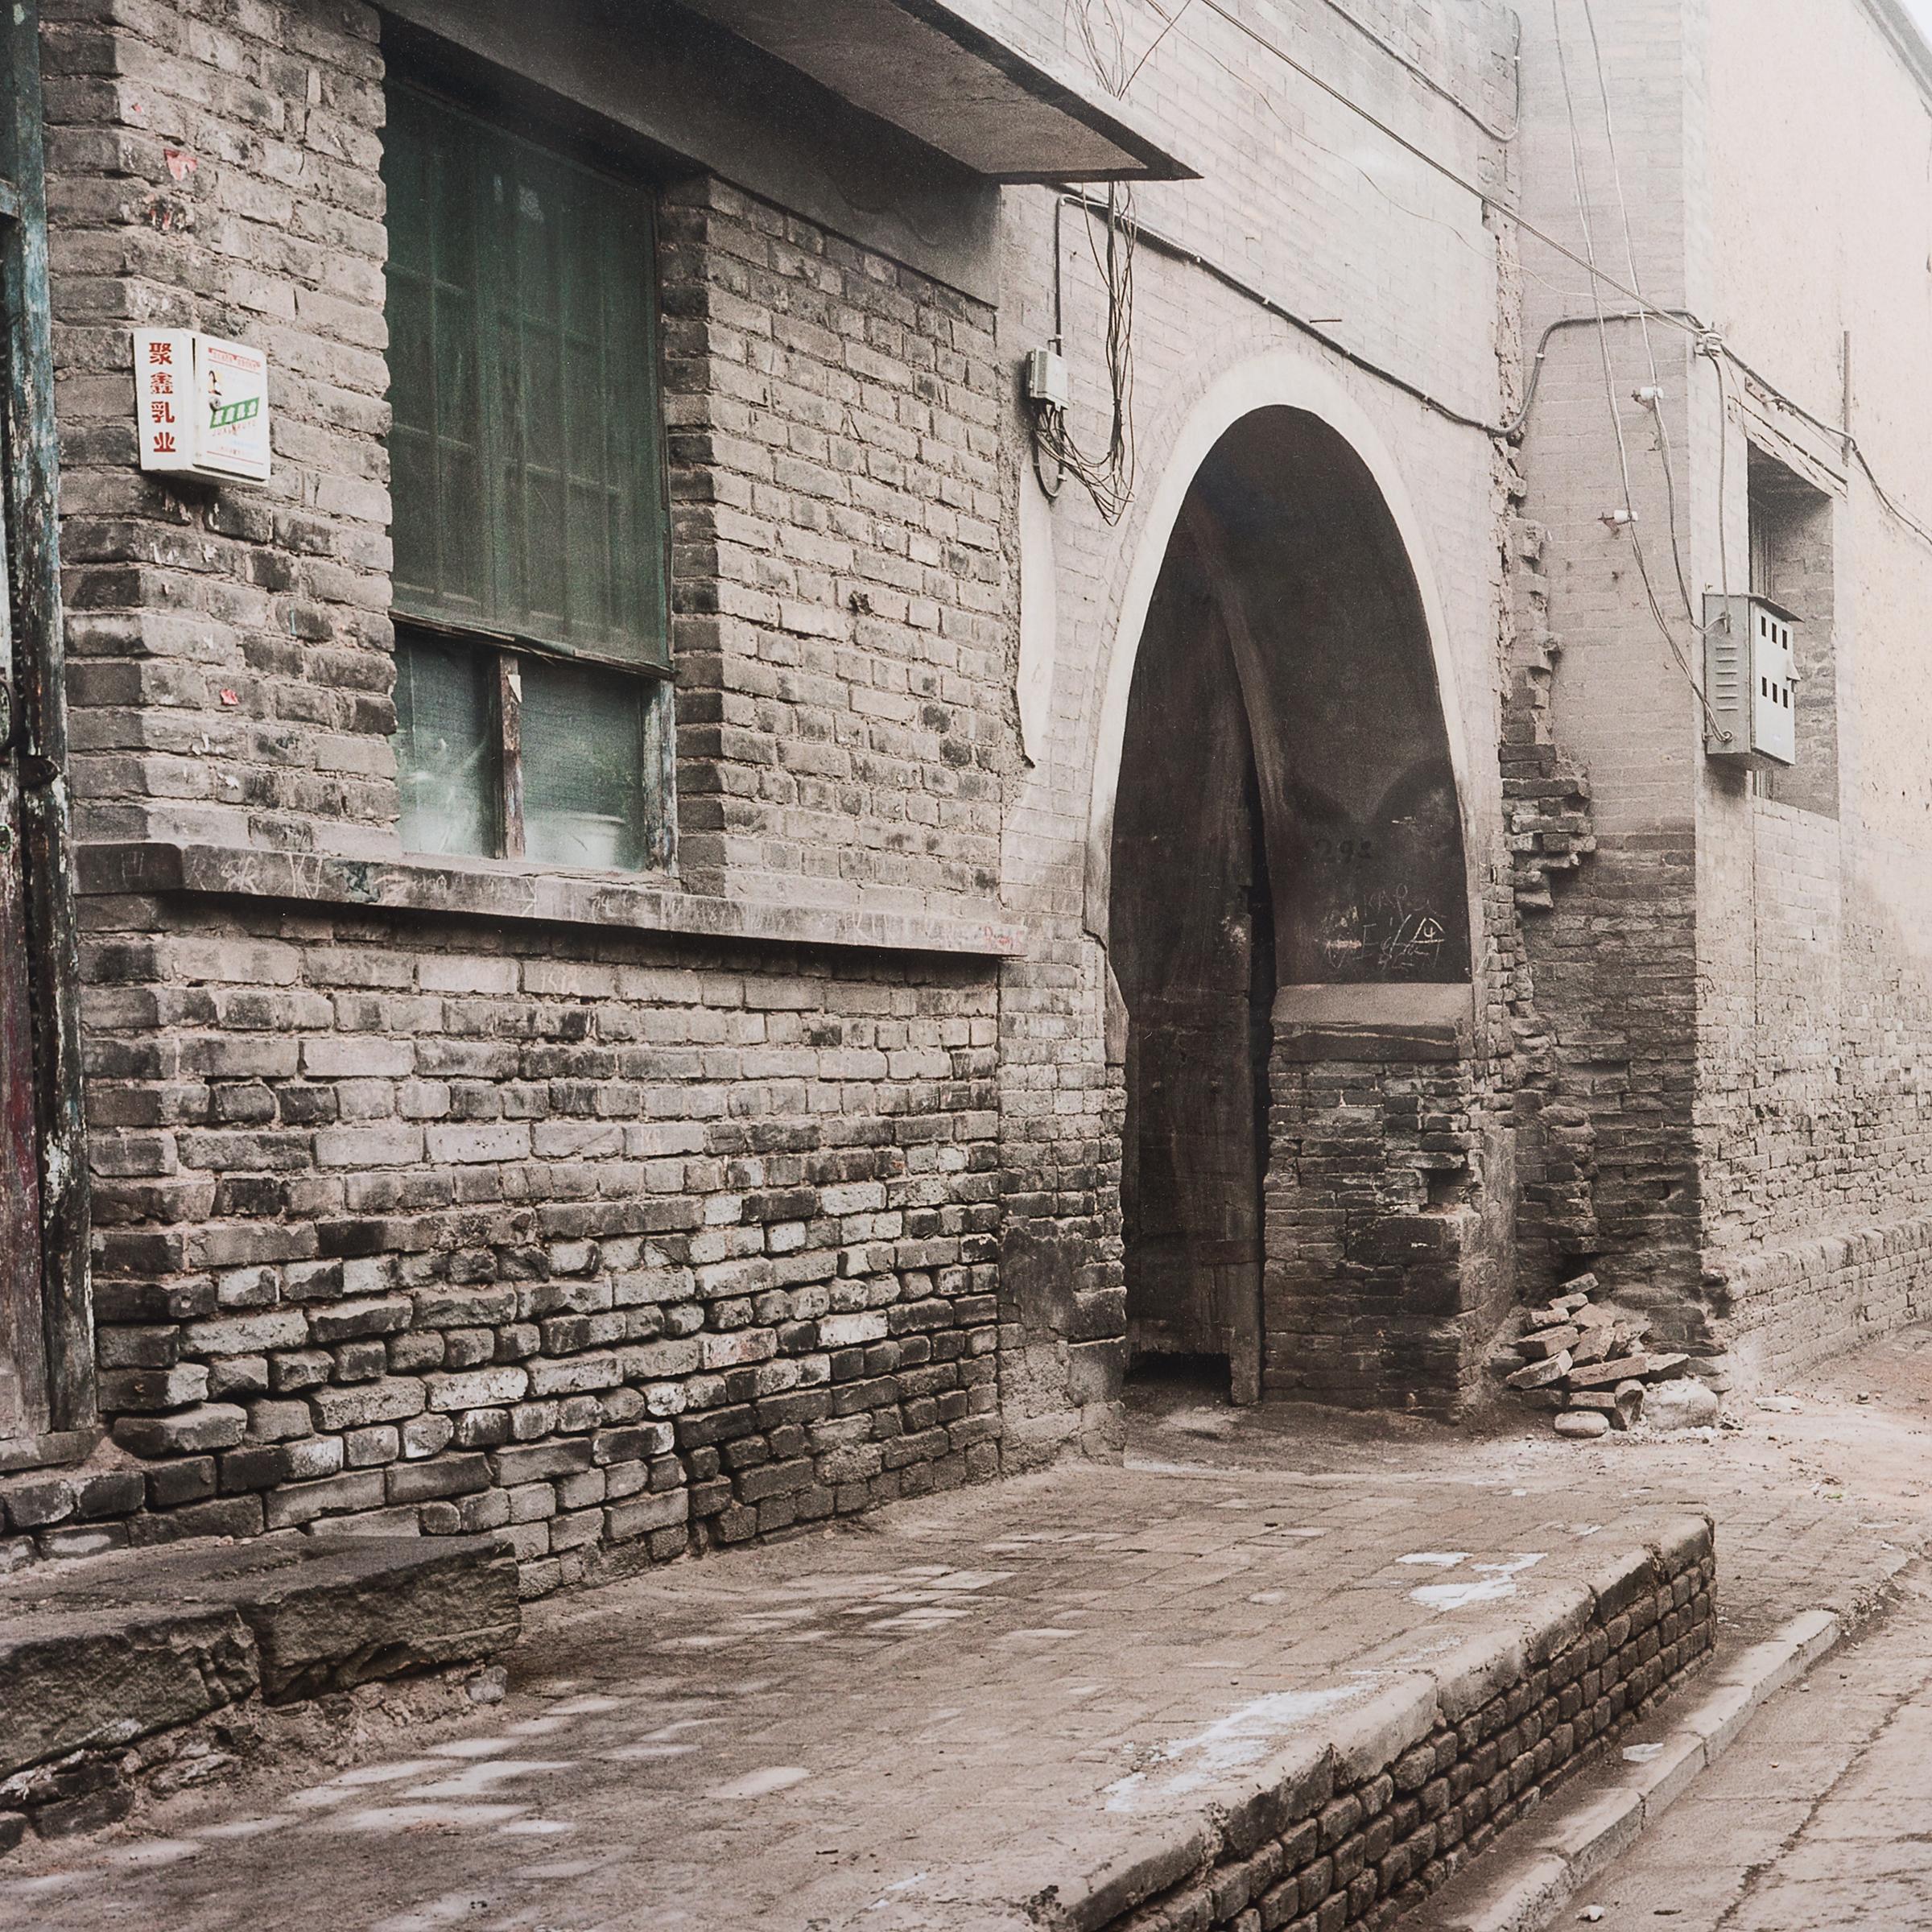 This evocative photograph is part of a series created by artist Sze Tsung Nicolas Leong that explore China’s complicated relationship with its ancient past and anticipated future. In this 2004 photograph, 100-year-old buildings line a vacant street